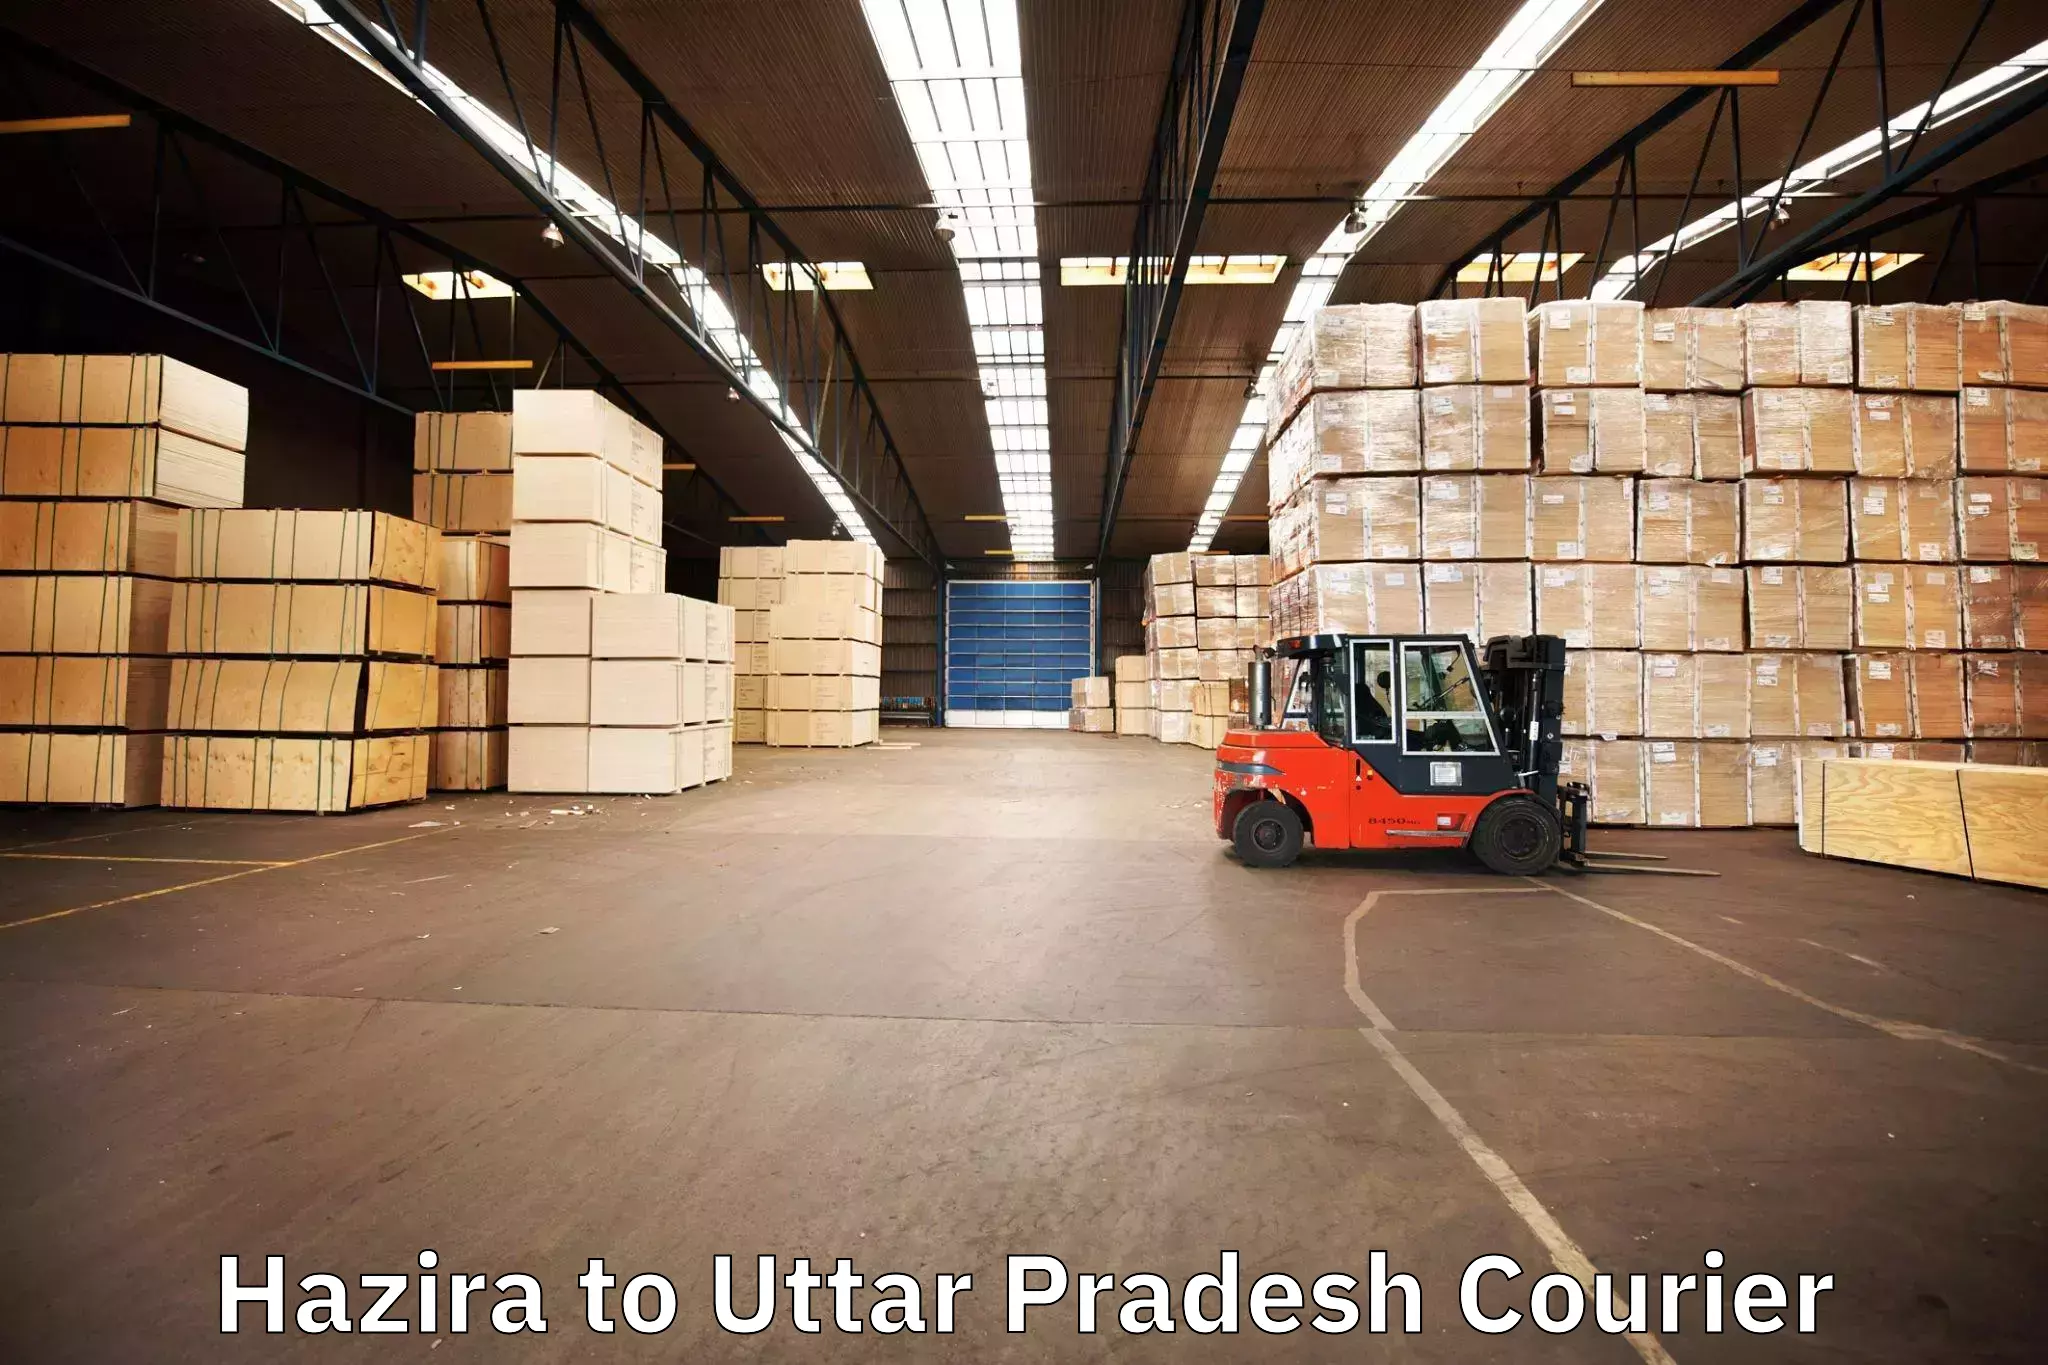 Reliable goods transport in Hazira to Kanpur